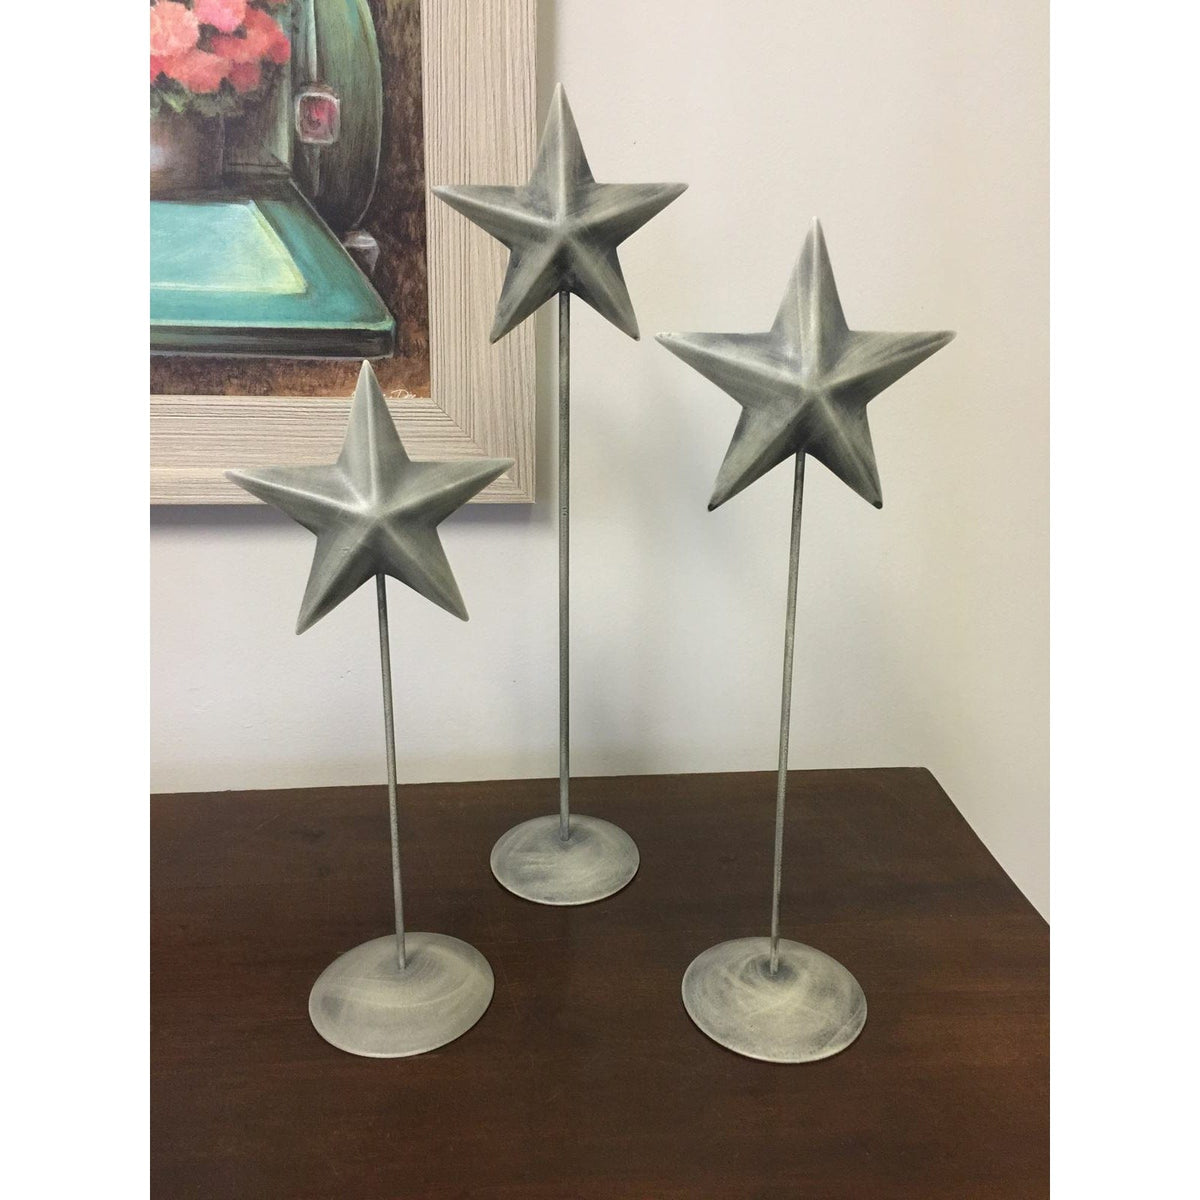 Vintage Barn Star Pedestals Set of 3-Country House-The Village Merchant